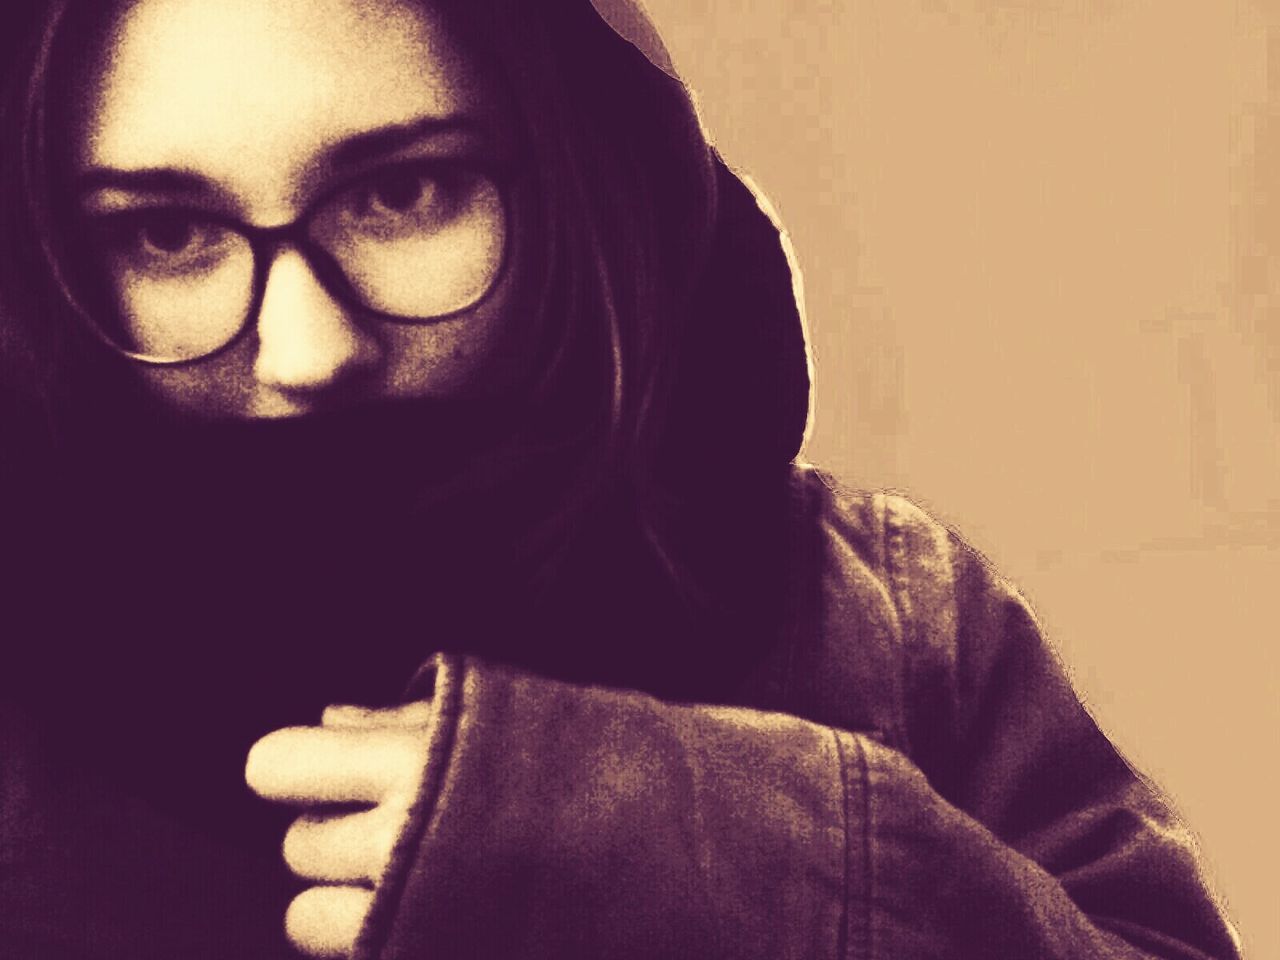 lifestyles, one person, real people, young adult, looking at camera, human face, front view, young women, leisure activity, hooded shirt, close-up, headshot, hood - clothing, portrait, indoors, eyeglasses, women, people, day, human body part, adult